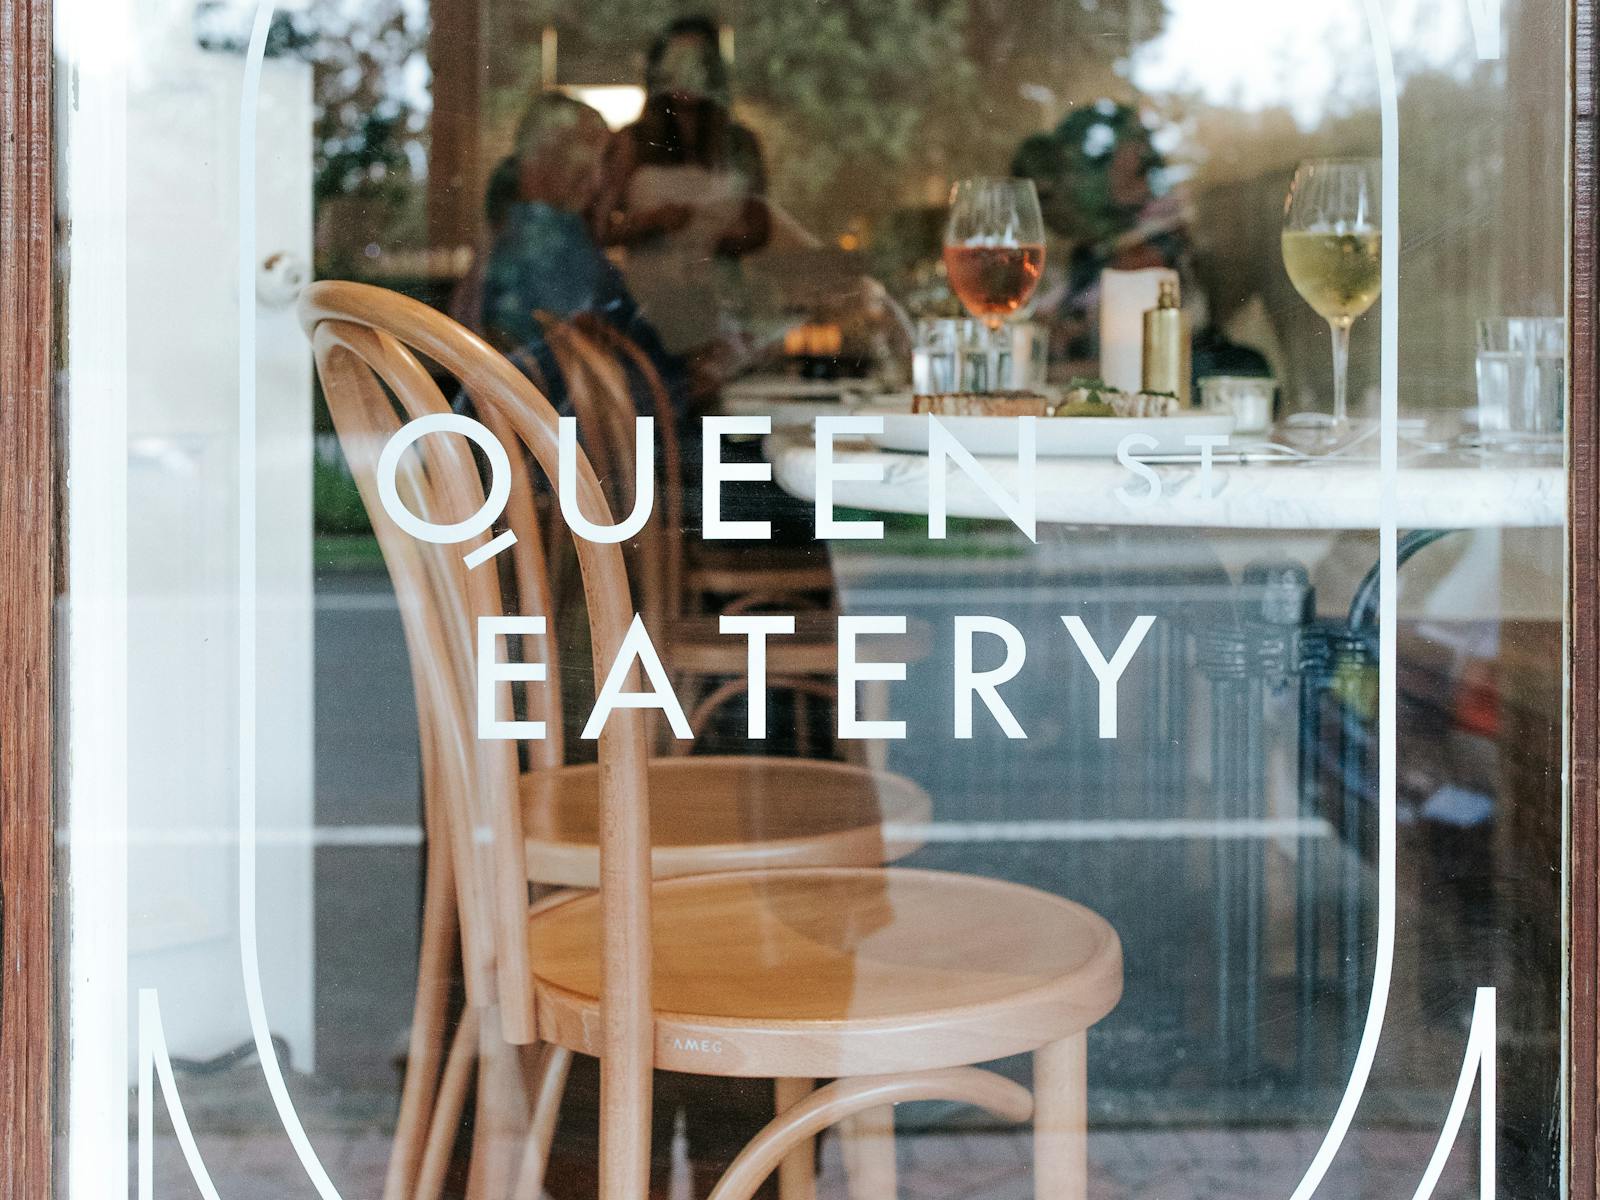 Welcome to Queen Street Eatery